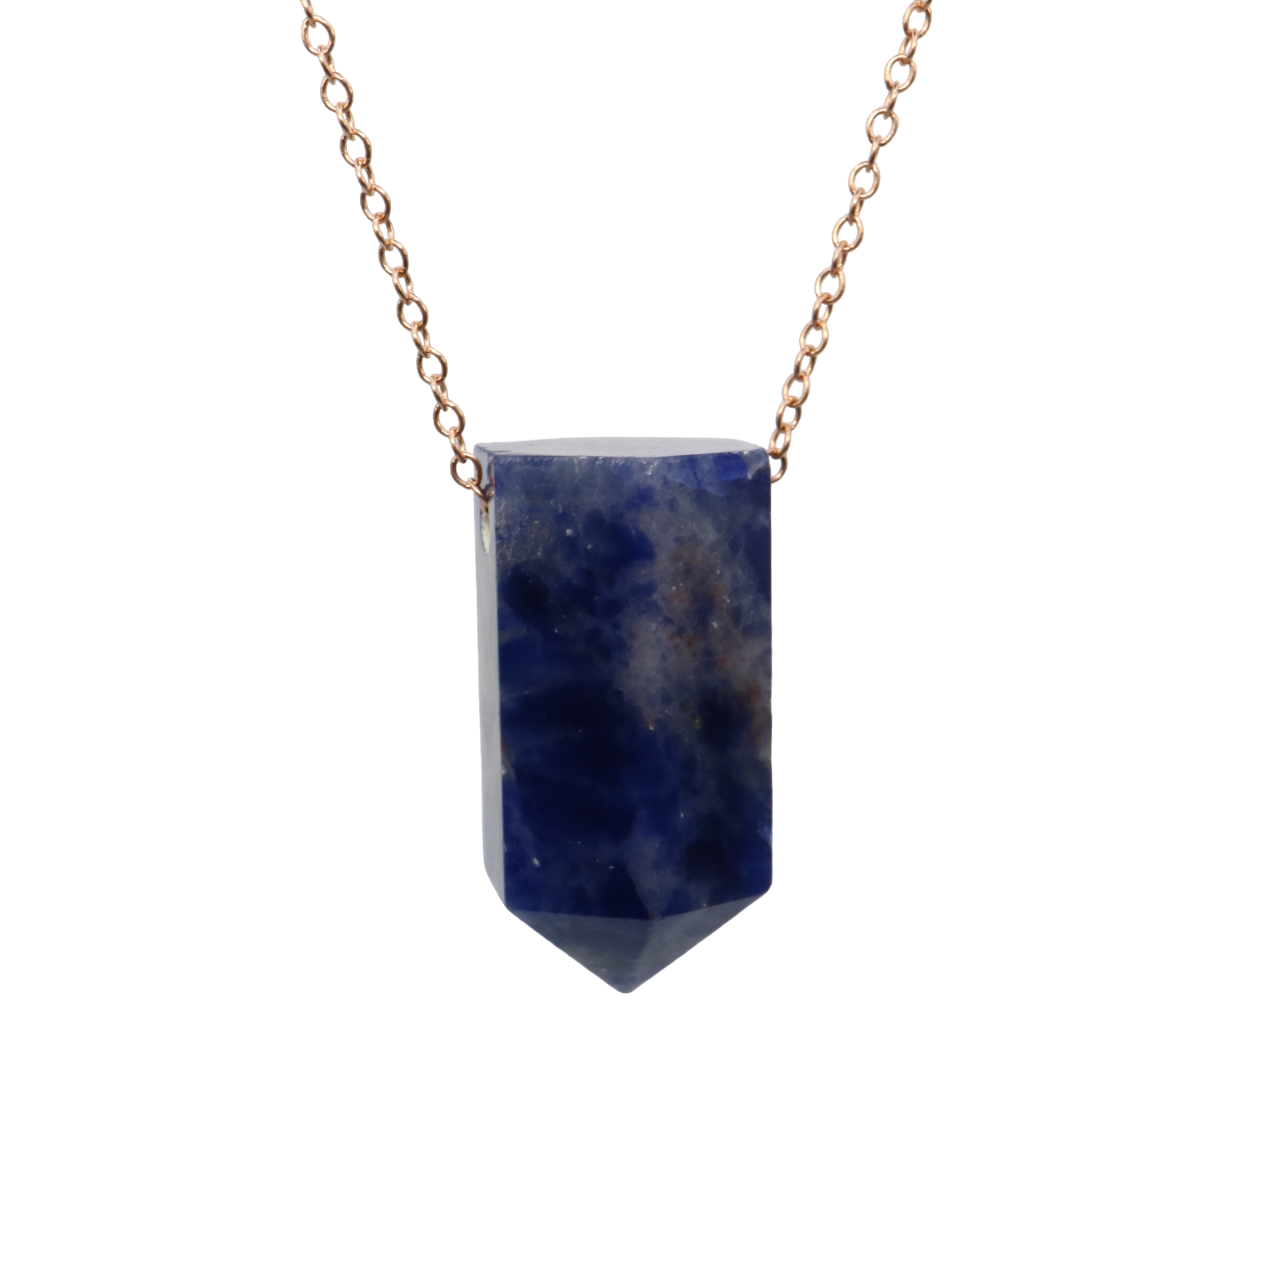 Sodalite Crystal on a fine Rose Gold plated 925 Sterling Silver chain